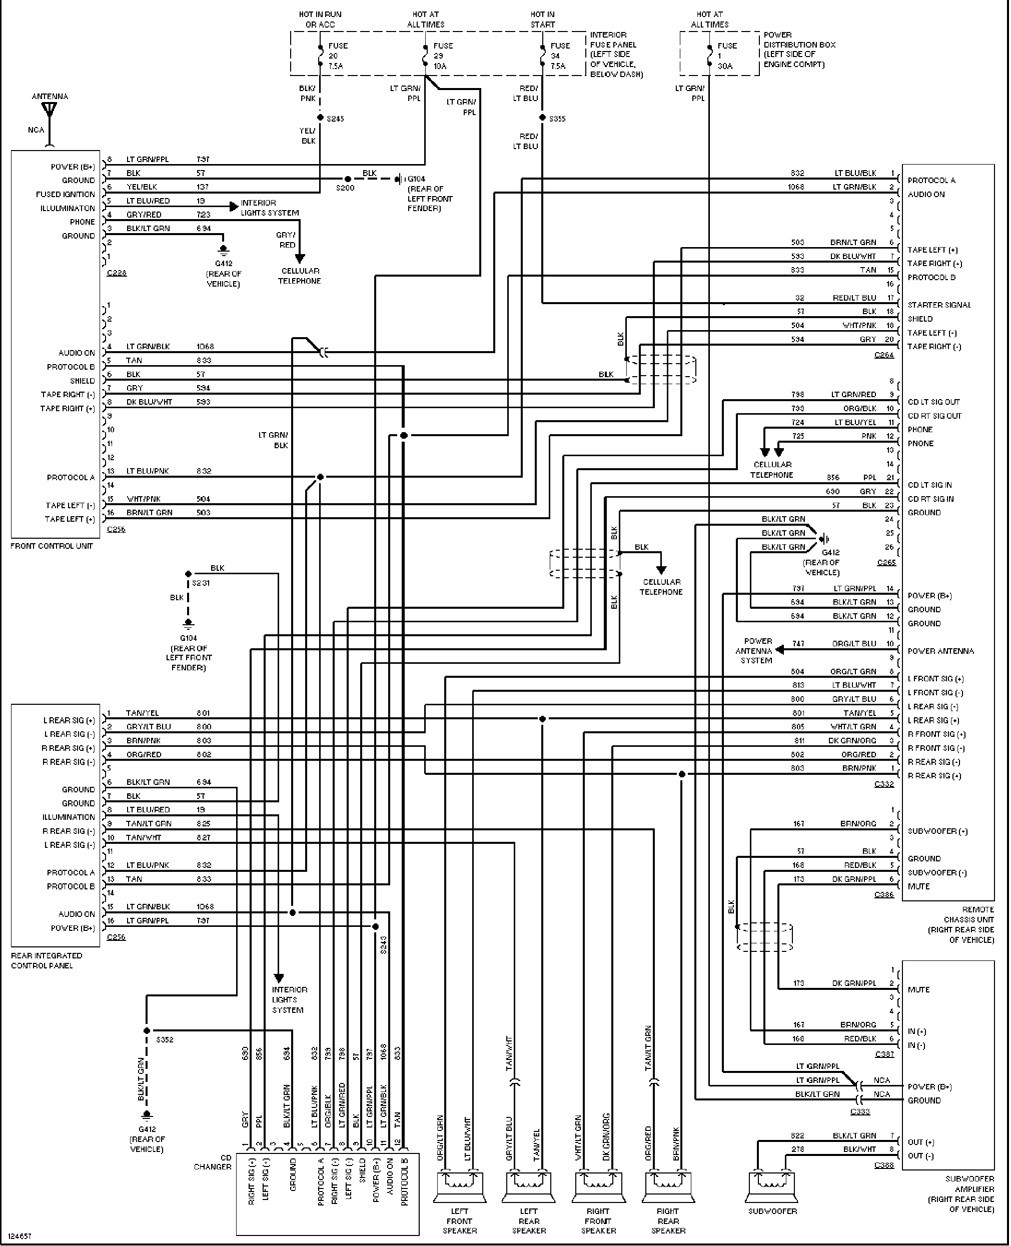 2005 Ford Explorer Stereo Wiring Diagram from mainetreasurechest.com